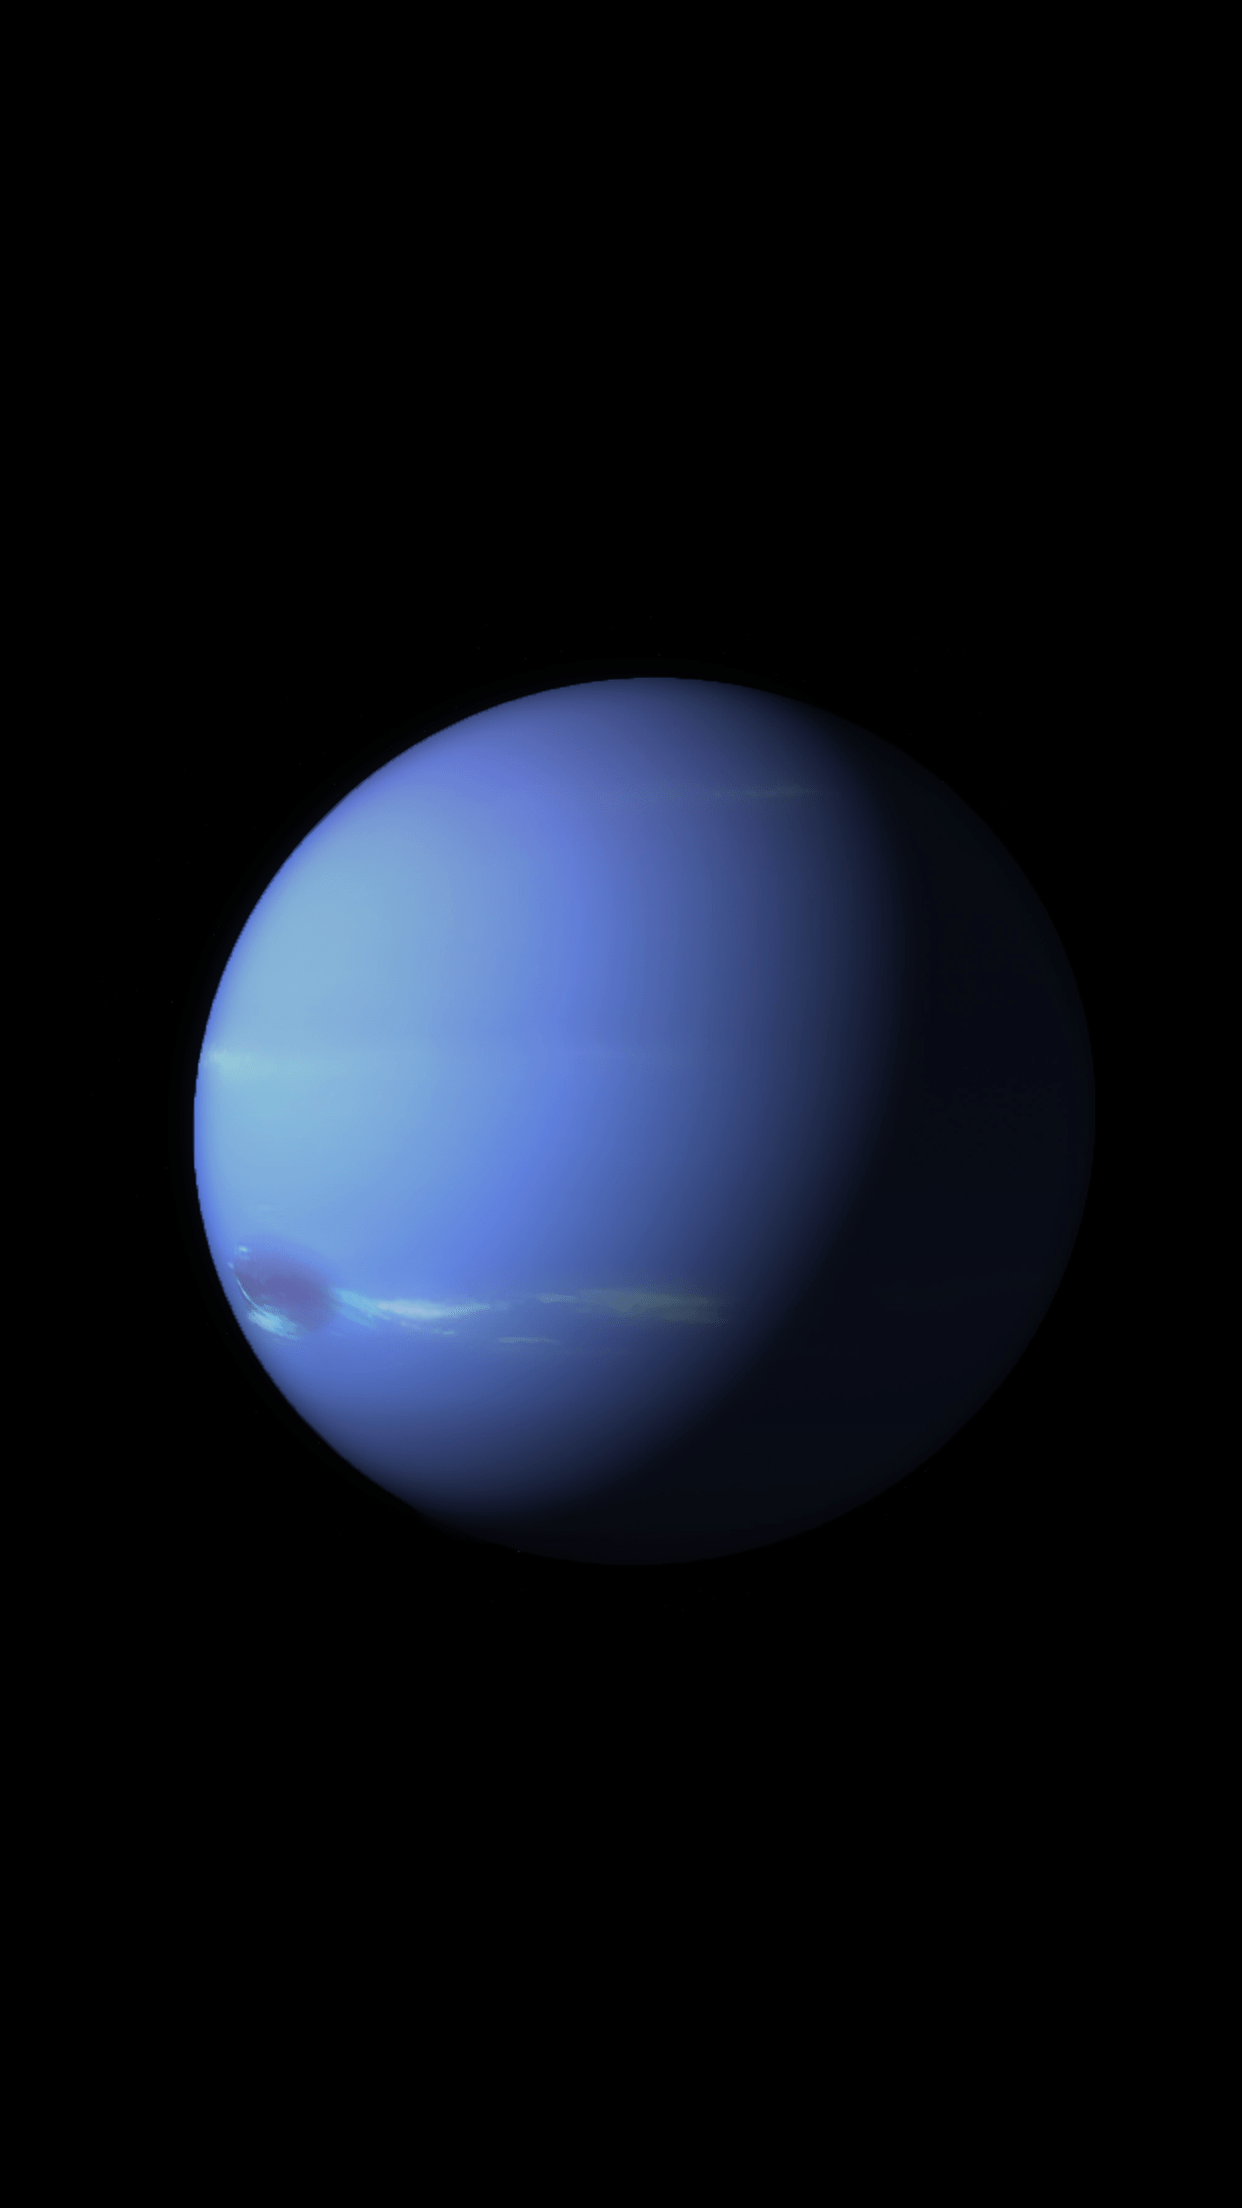 iOS 9 Planet Neptune Wallpaper for iPhone Pro Max, X, 6